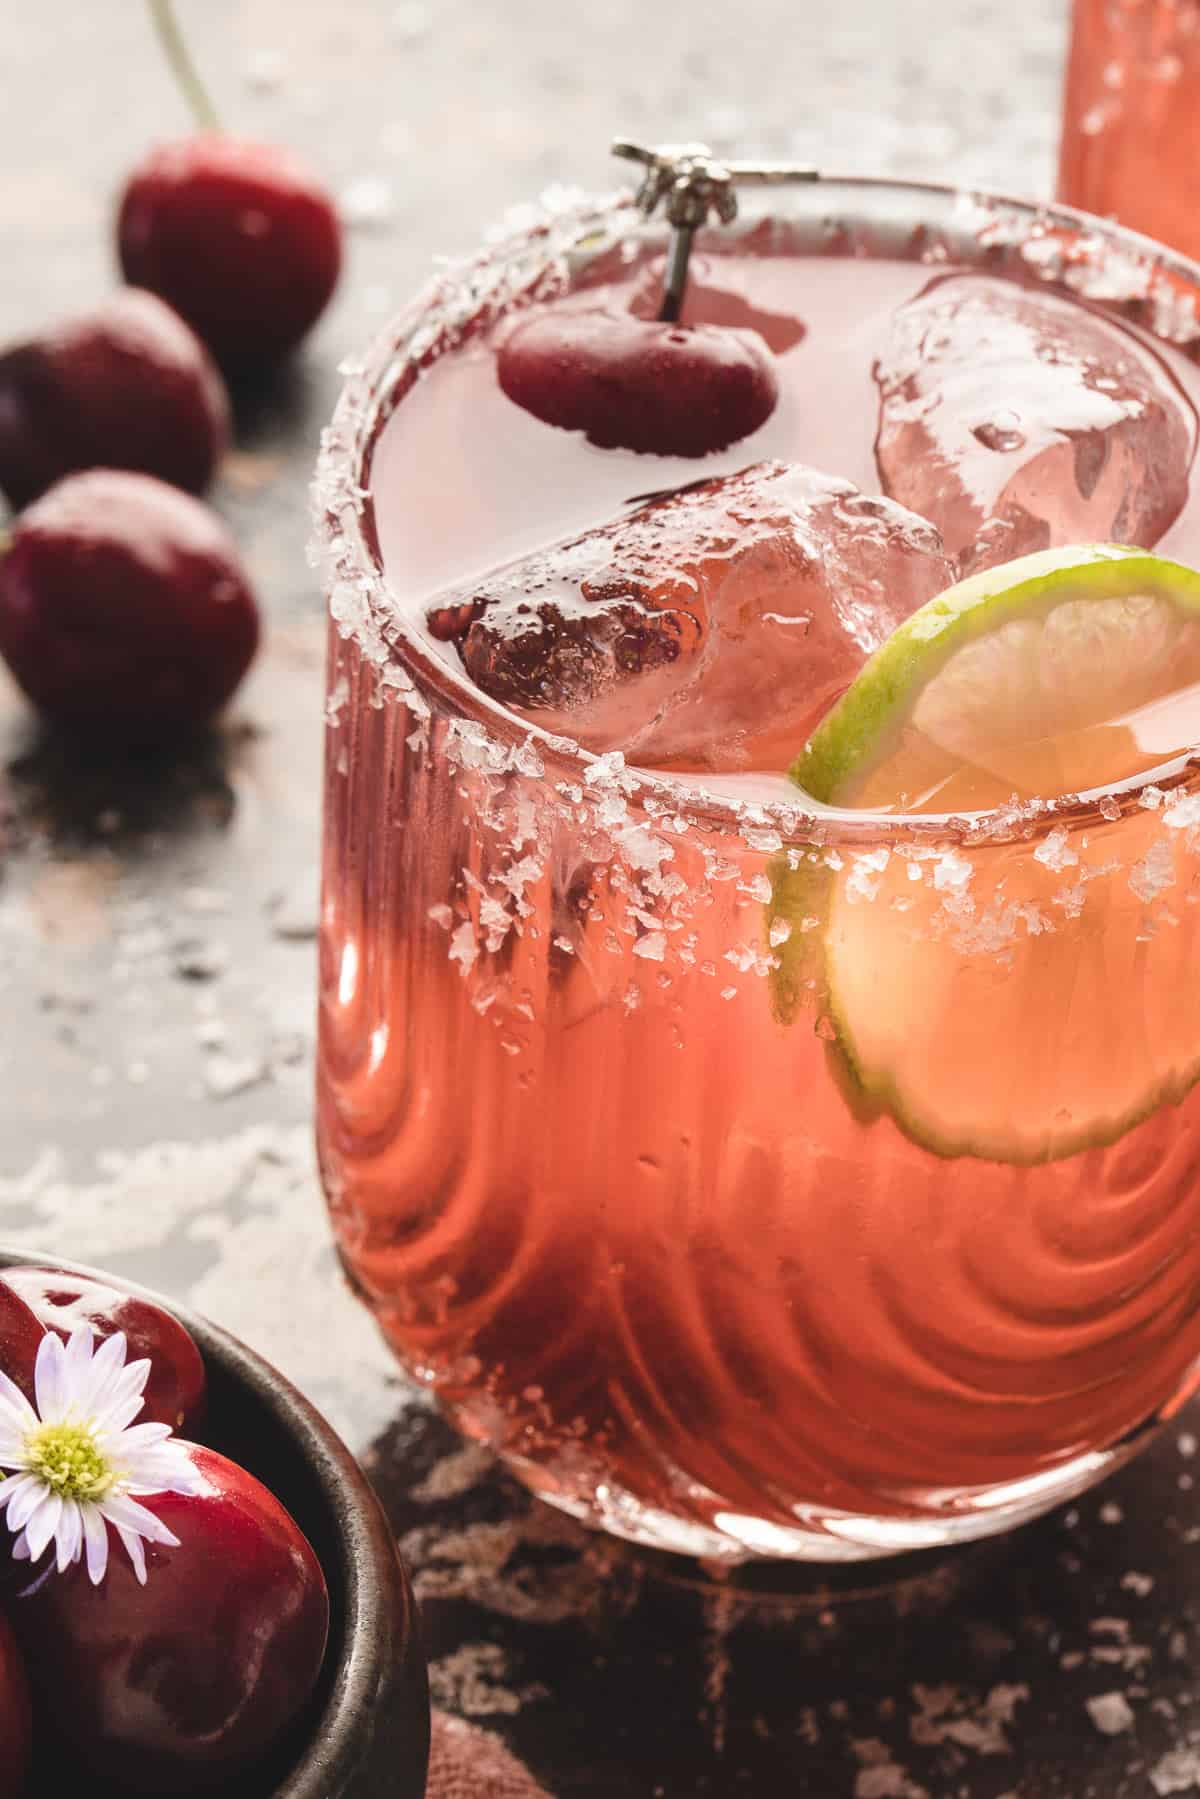 Front close-up view of a cherry margarita in a salt-rimmed glass garnished with lime and a cherry.